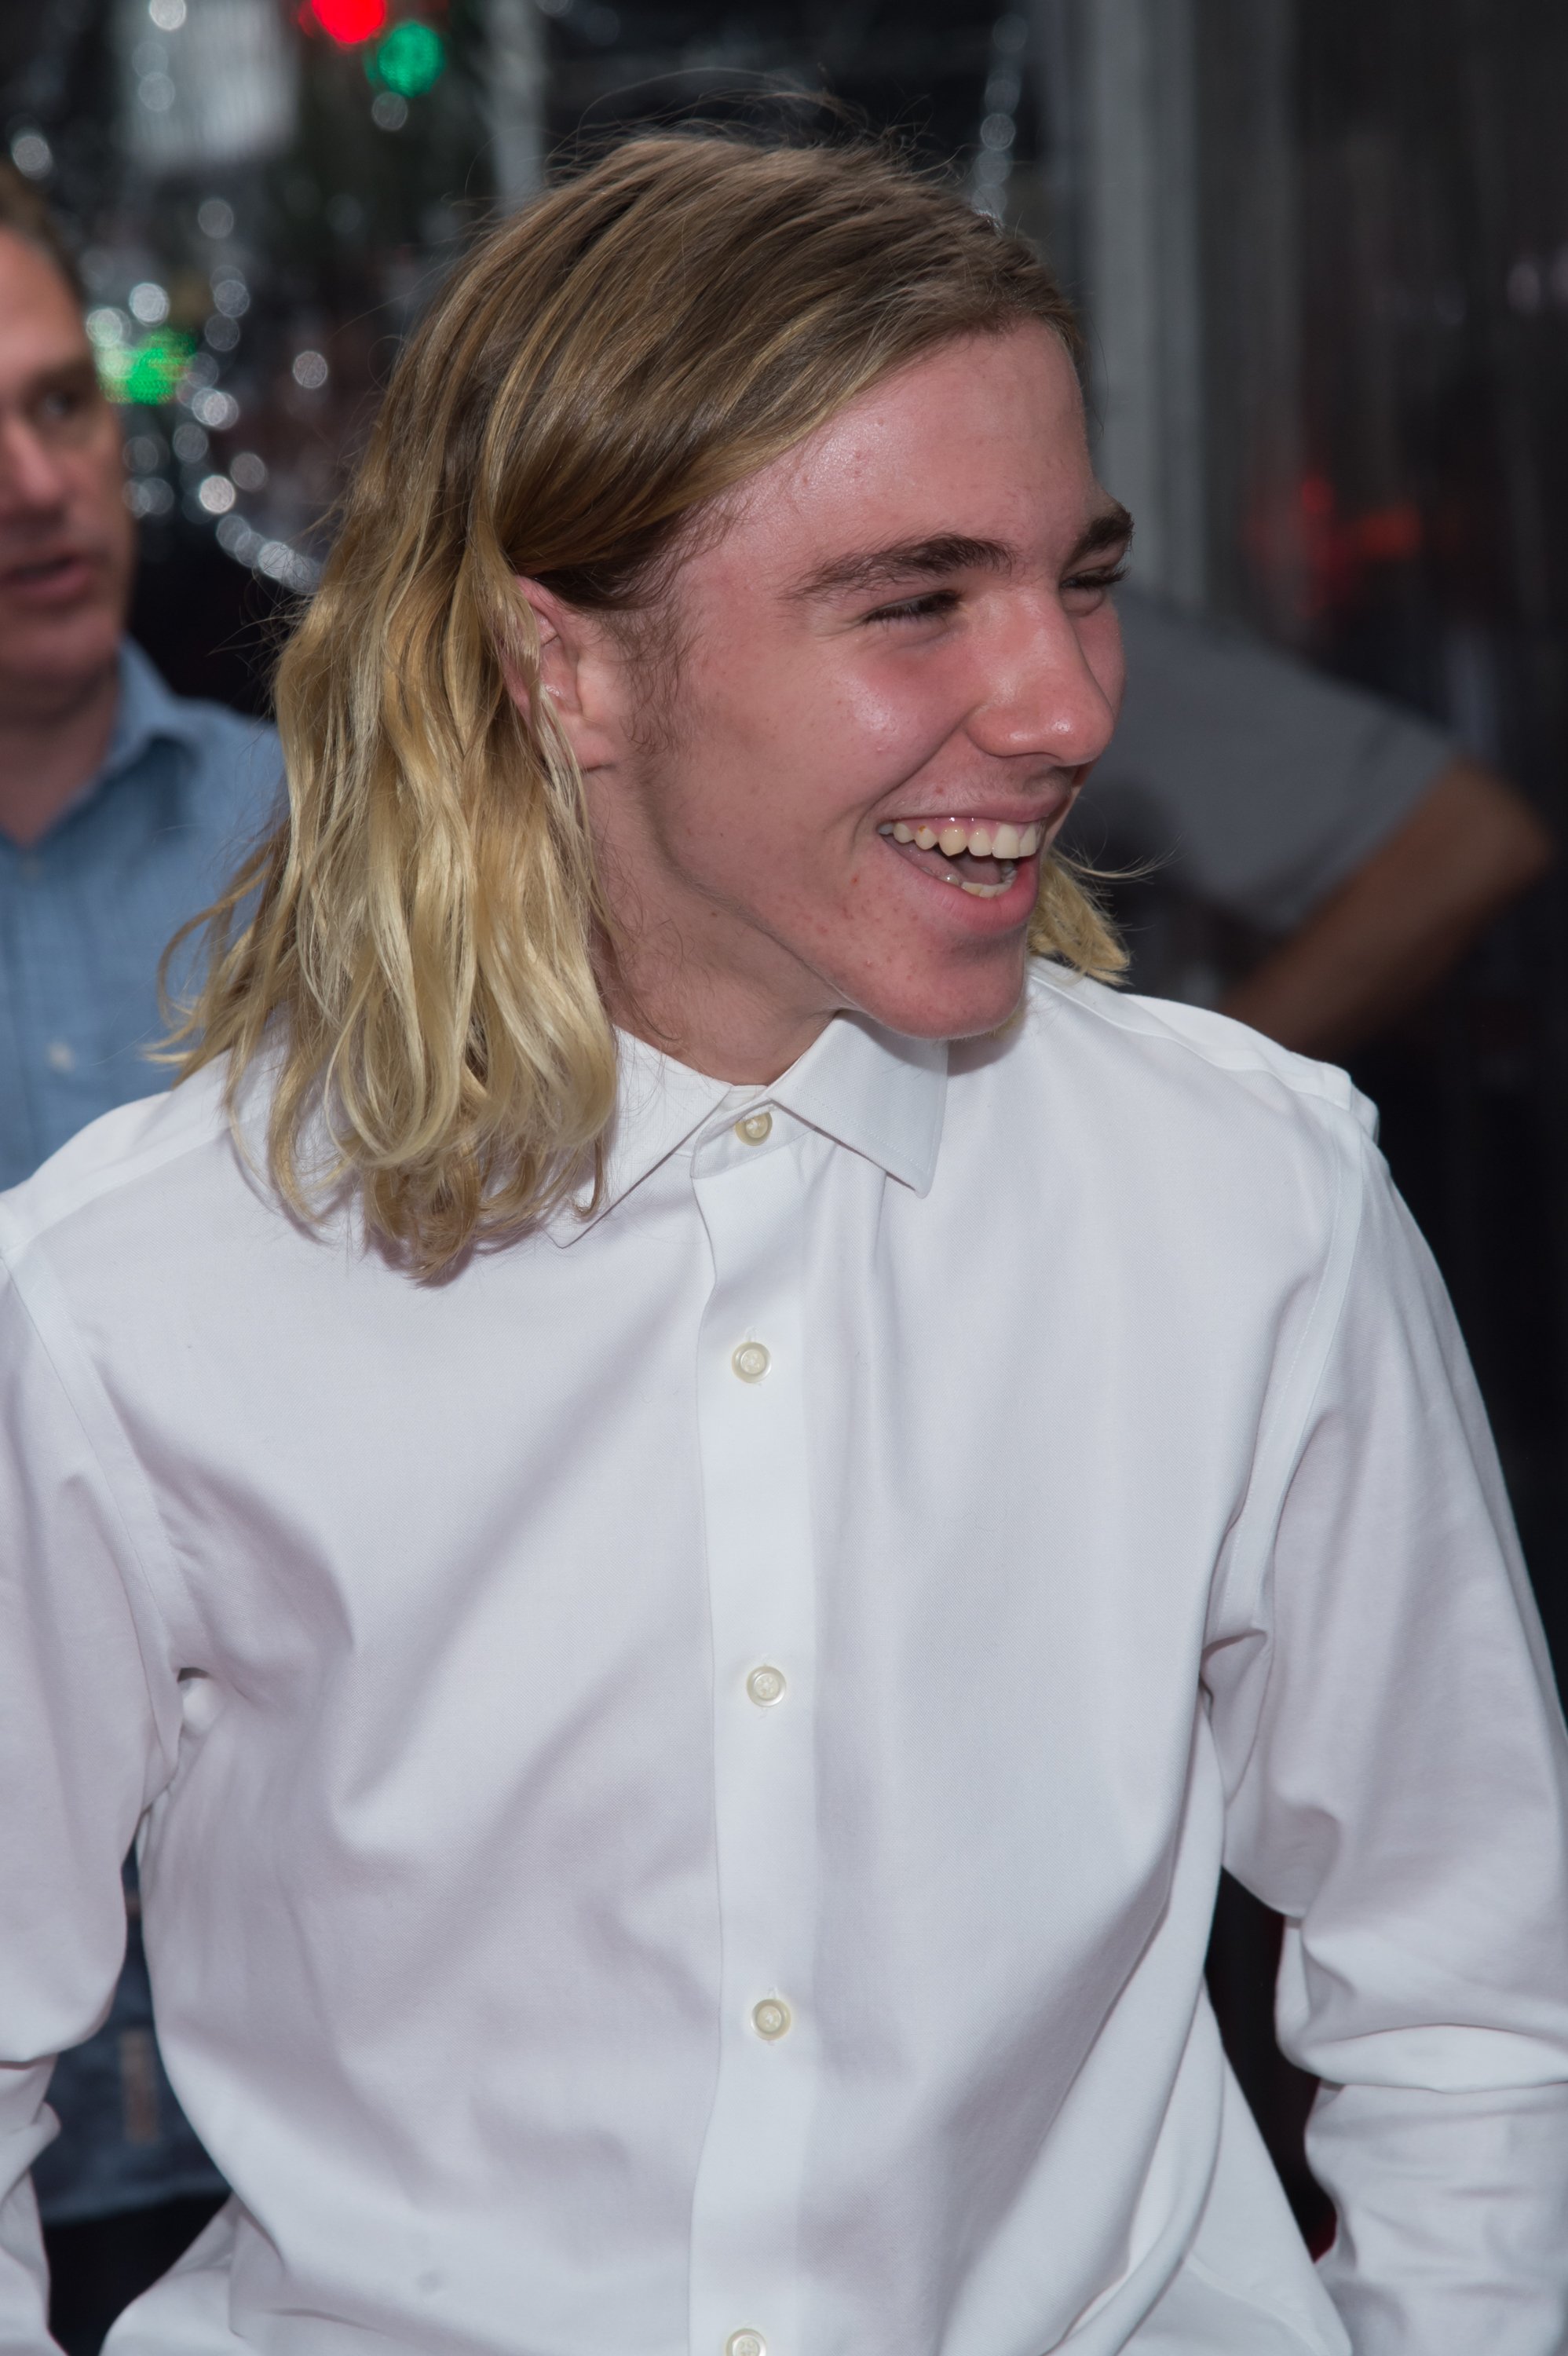  Rocco Ritchie attends "The Man From U.N.C.L.E." New York premiere at the Ziegfeld Theater on August 10, 2015 in New York City | Source: Getty Images